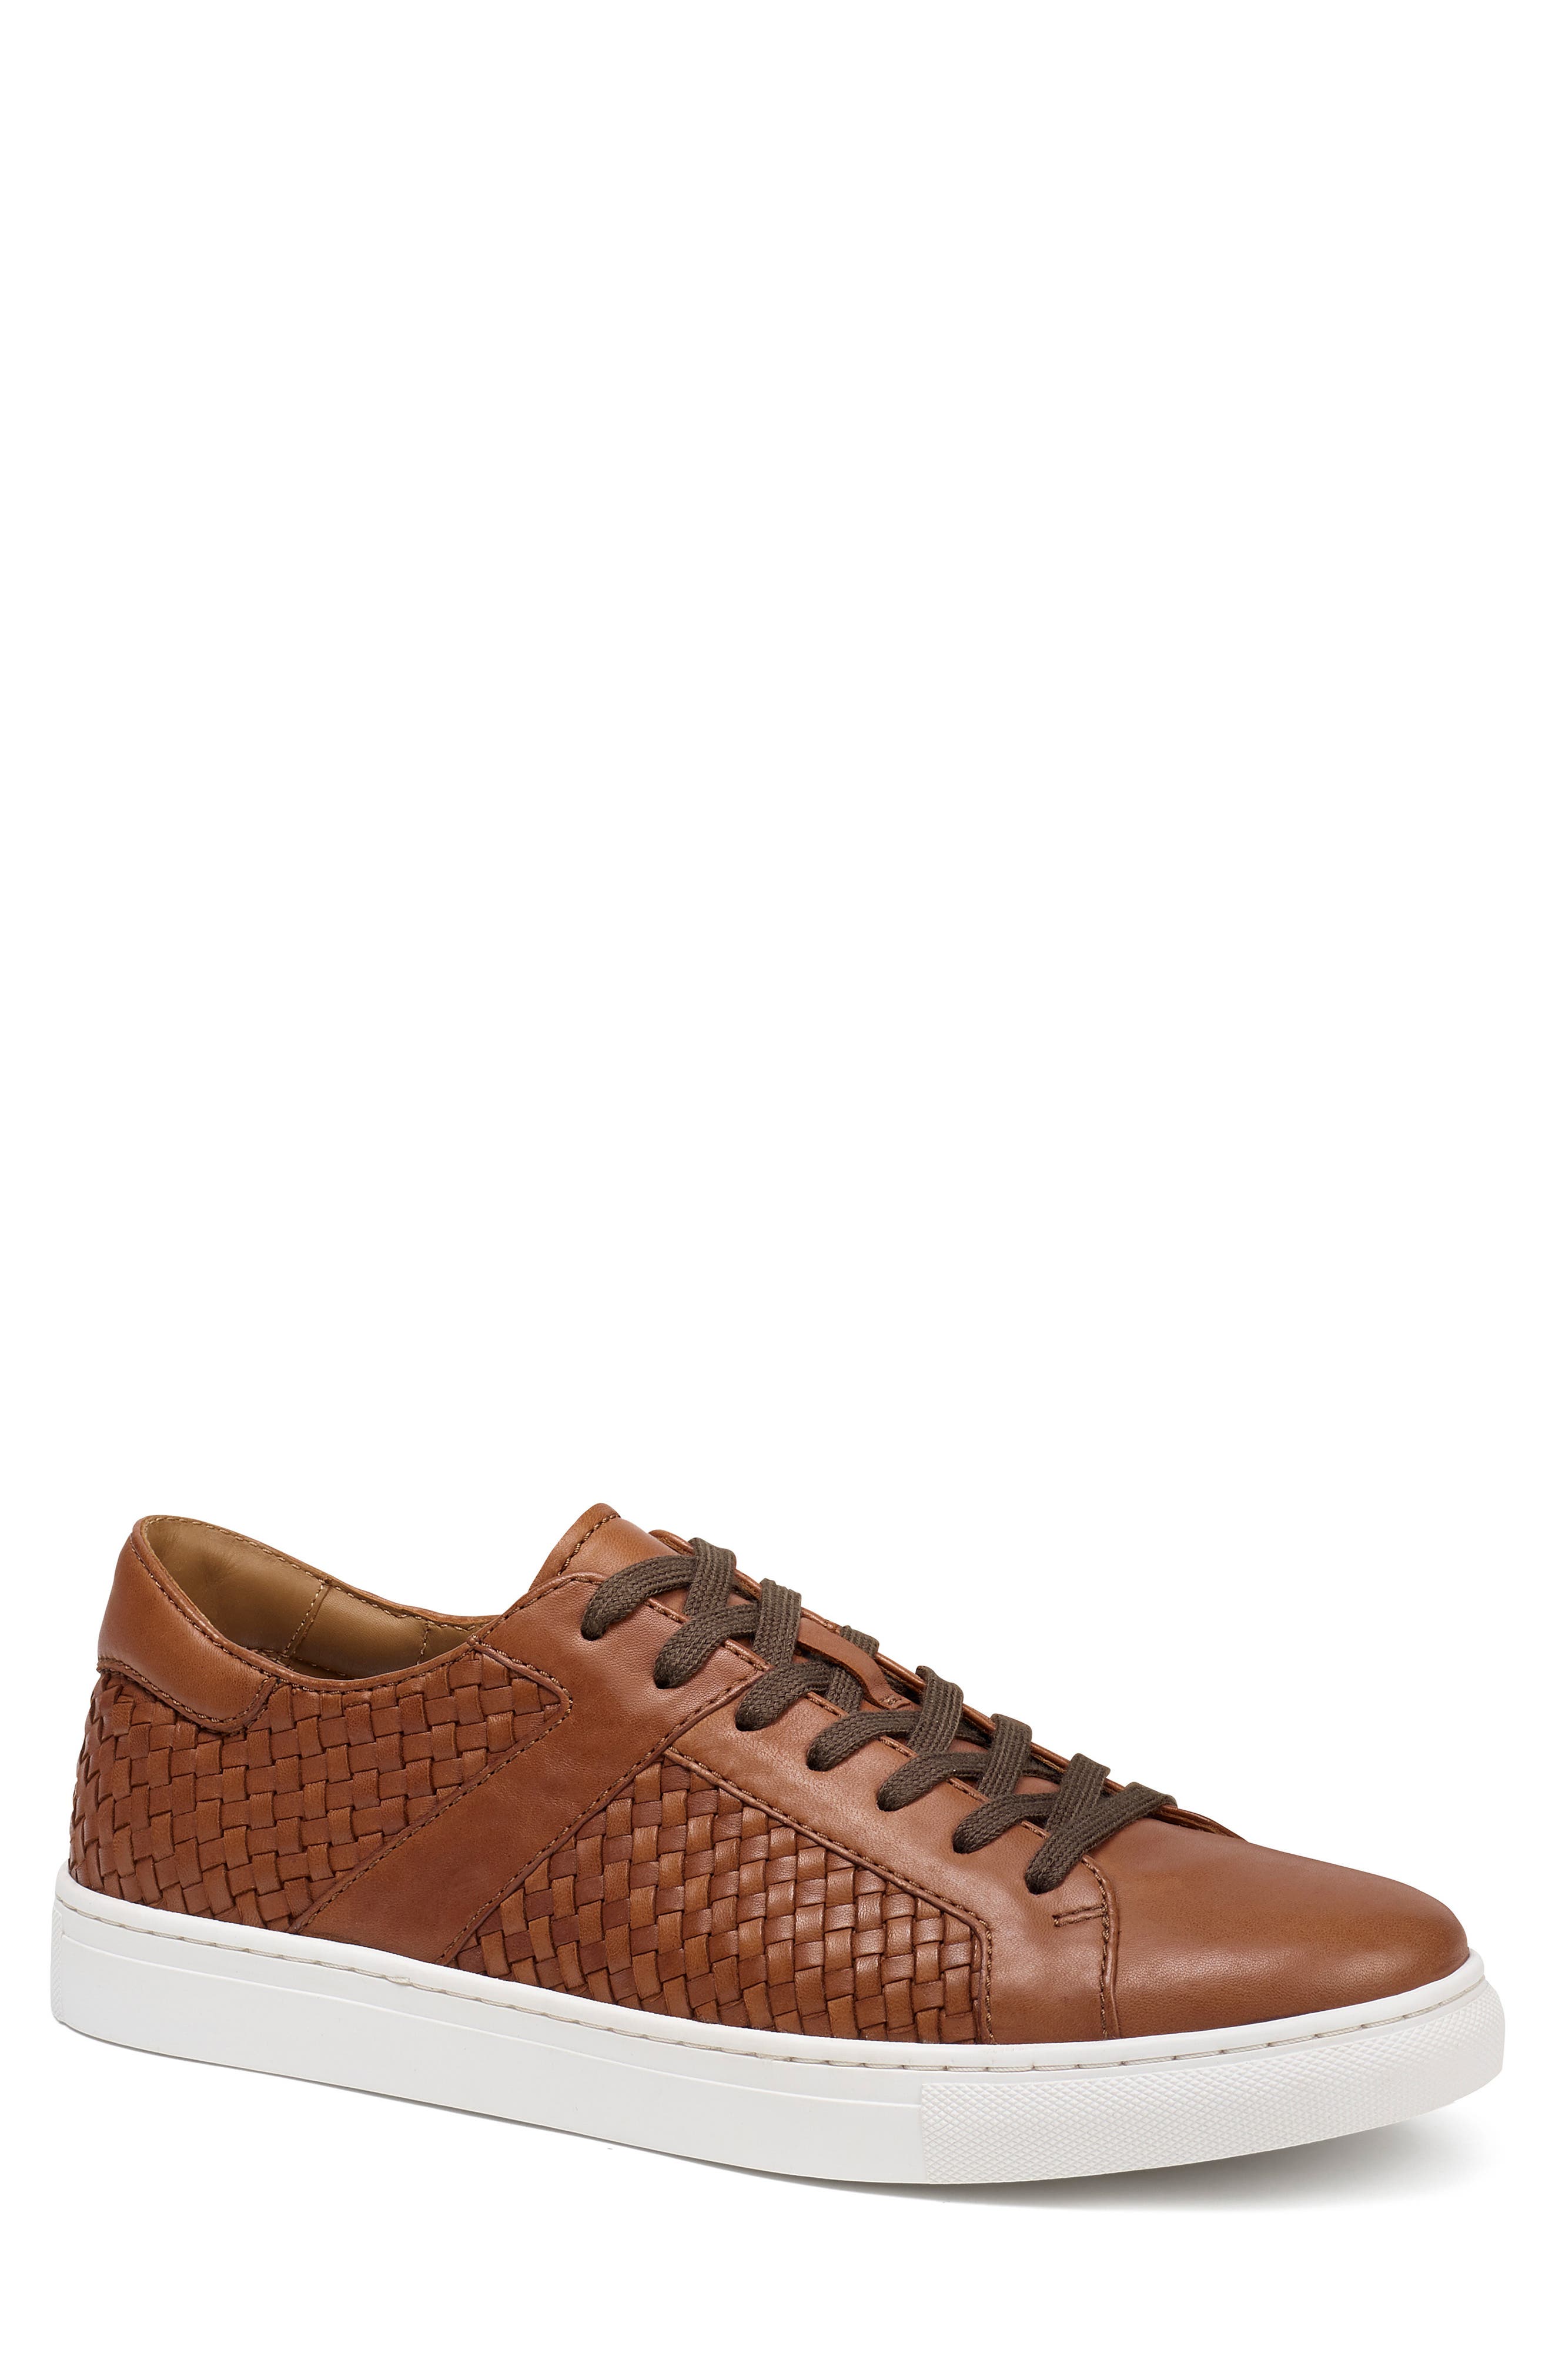 woven leather sneakers